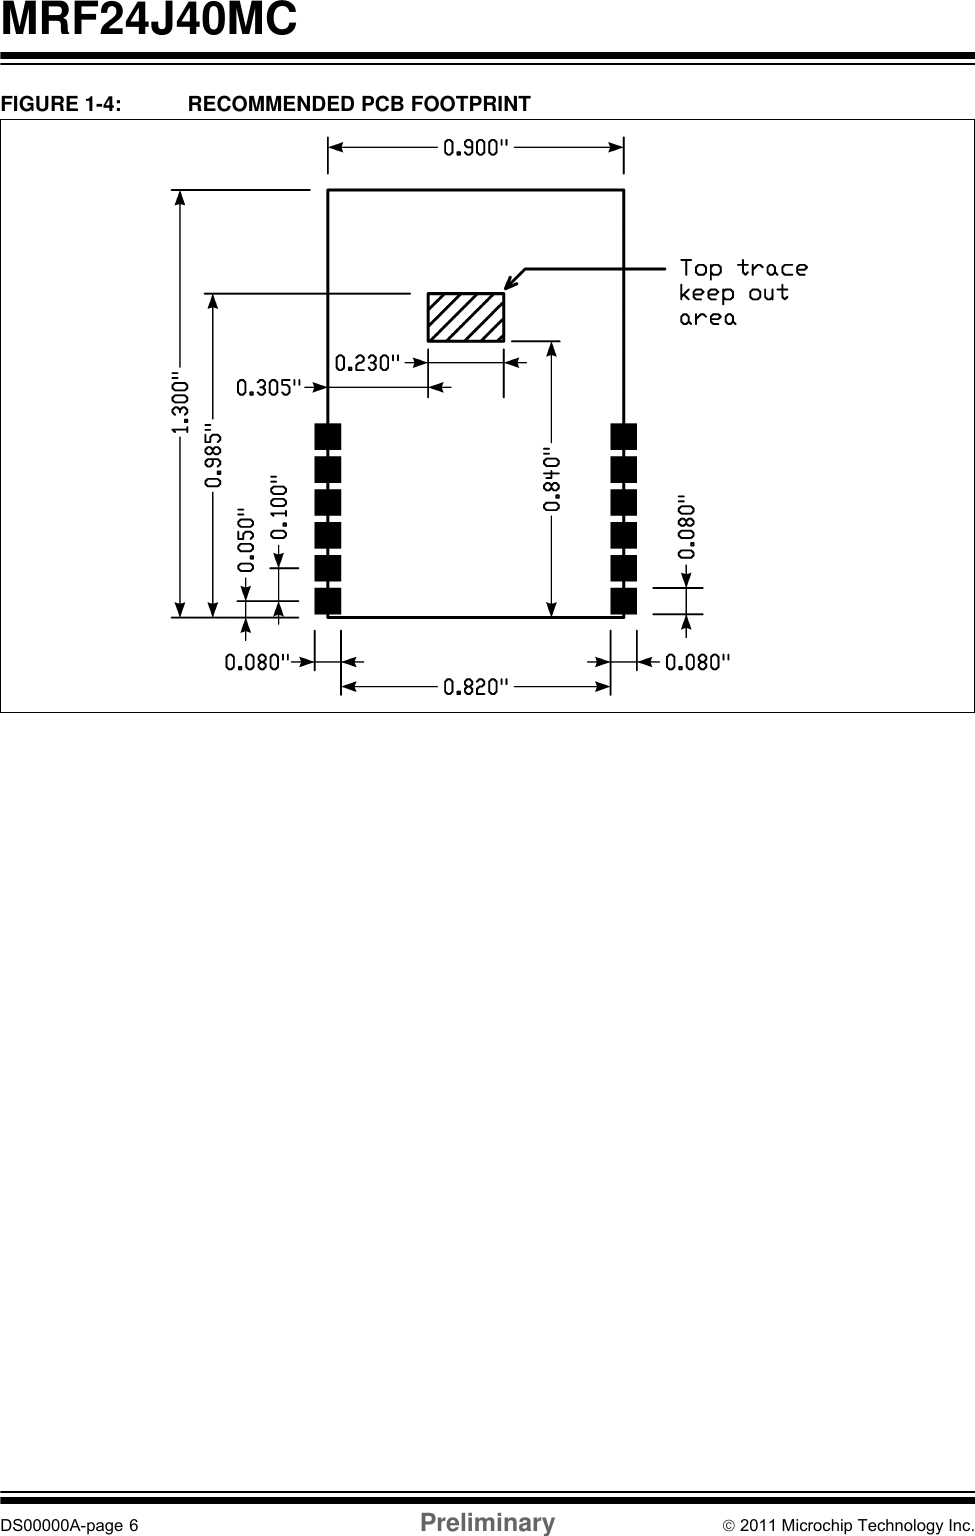 MRF24J40MC DS00000A-page  6 Preliminary © 2011 Microchip Technology Inc.FIGURE 1-4: RECOMMENDED PCB FOOTPRINT